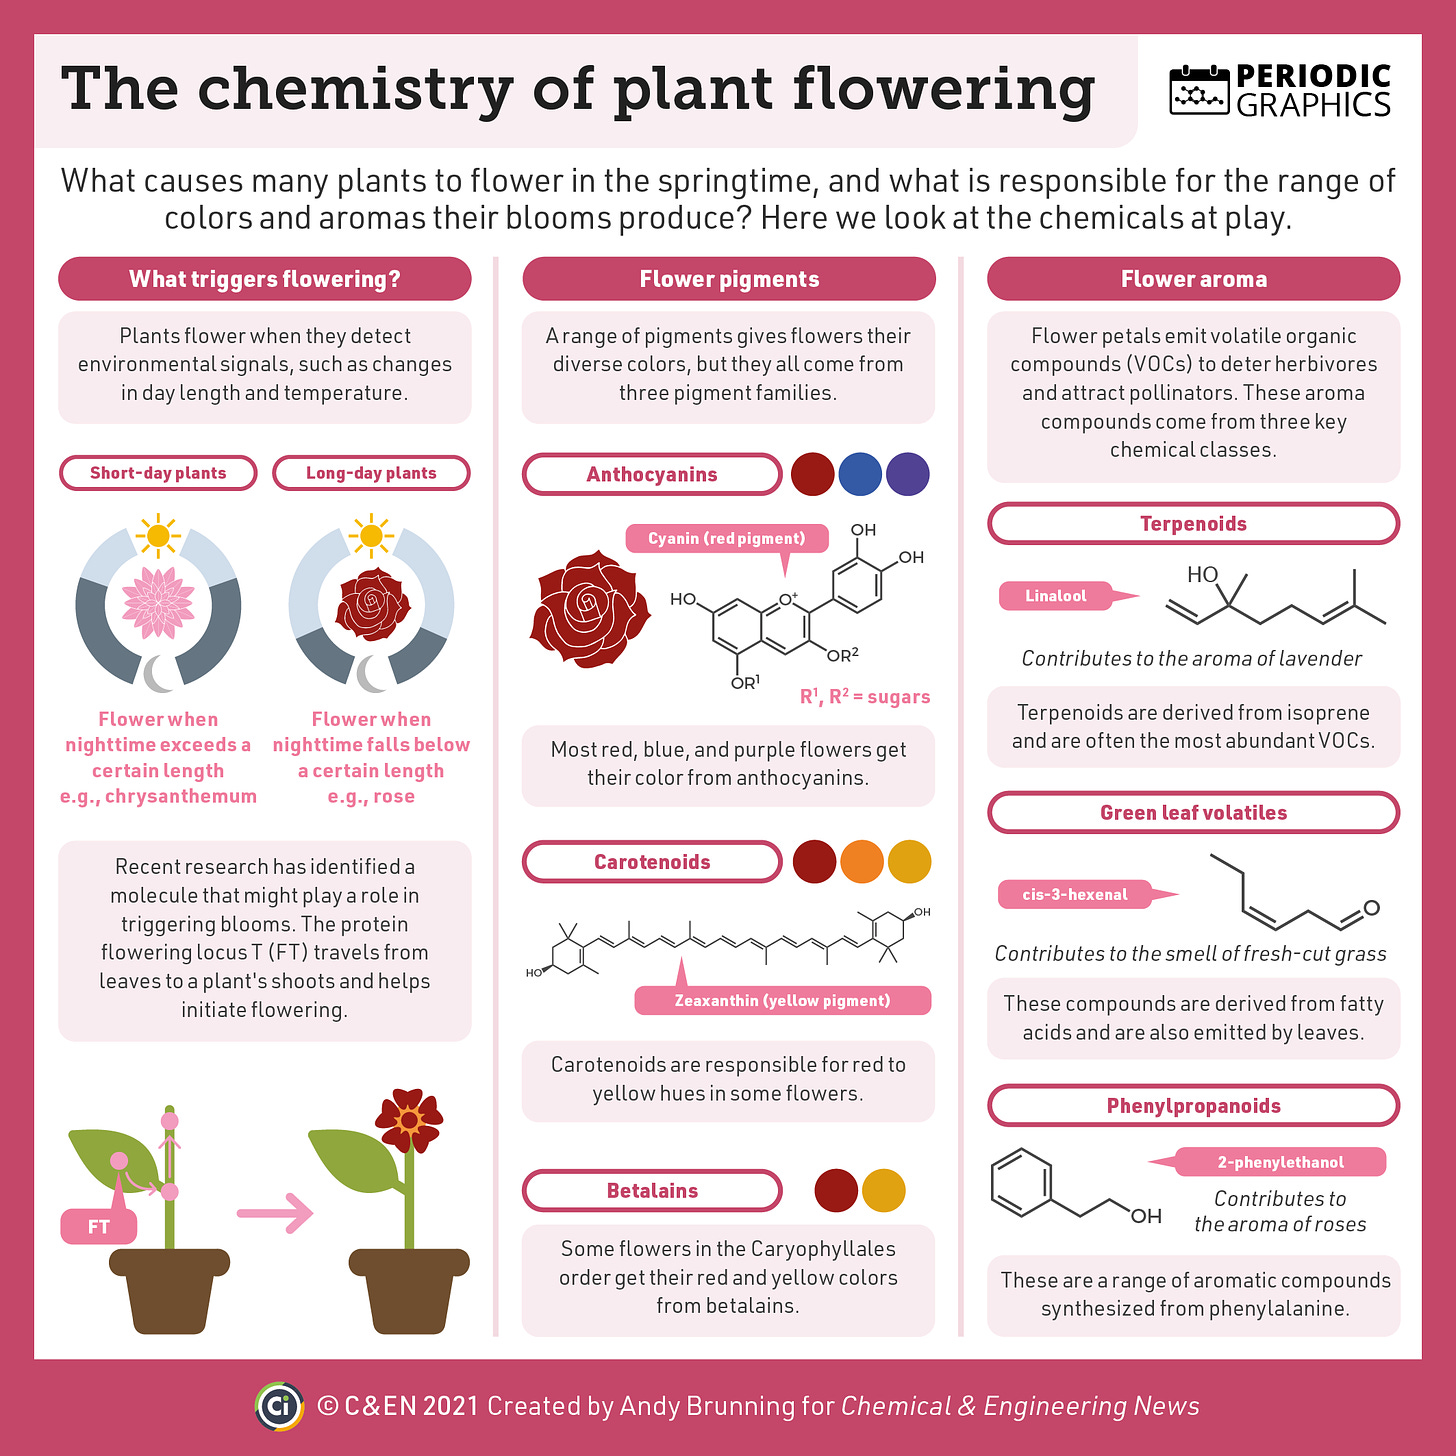 A three-column infographic focusing on various aspects of flower chemistry.   The first column examines what makes plants bloom. Plants flower when they detect environmental signals, such as changes in day length and temperature. The substance that triggers flowering is known as florigen. For decades, it was a hypothesized substance, but recent research has identified a protein, flowering locus T, that travels from leaves to a plant's shoots and helps initiate flowering.  The second column looks at the pigments that give flowers their color. These pigments come from three families. Most red, blue, and purple flowers get their color from anthocyanins. Carotenoids are responsible for red to yellow hues in some flowers. Some flowers in the Caryophyllales order get their red and yellow colors from betalains.   The third column examines flower aroma. Flower petals emit volatile organic compounds (VOCs) to deter herbivores and attract pollinators. These aroma compounds come from three key chemical classes. Terpenoids are derived from isoprene and are often the most abundant VOCs. Green leaf volatiles are derived from fatty acids and are also emitted by leaves. Phenylpropanoids are a range of aromatic compounds synthesized from phenylalanine.